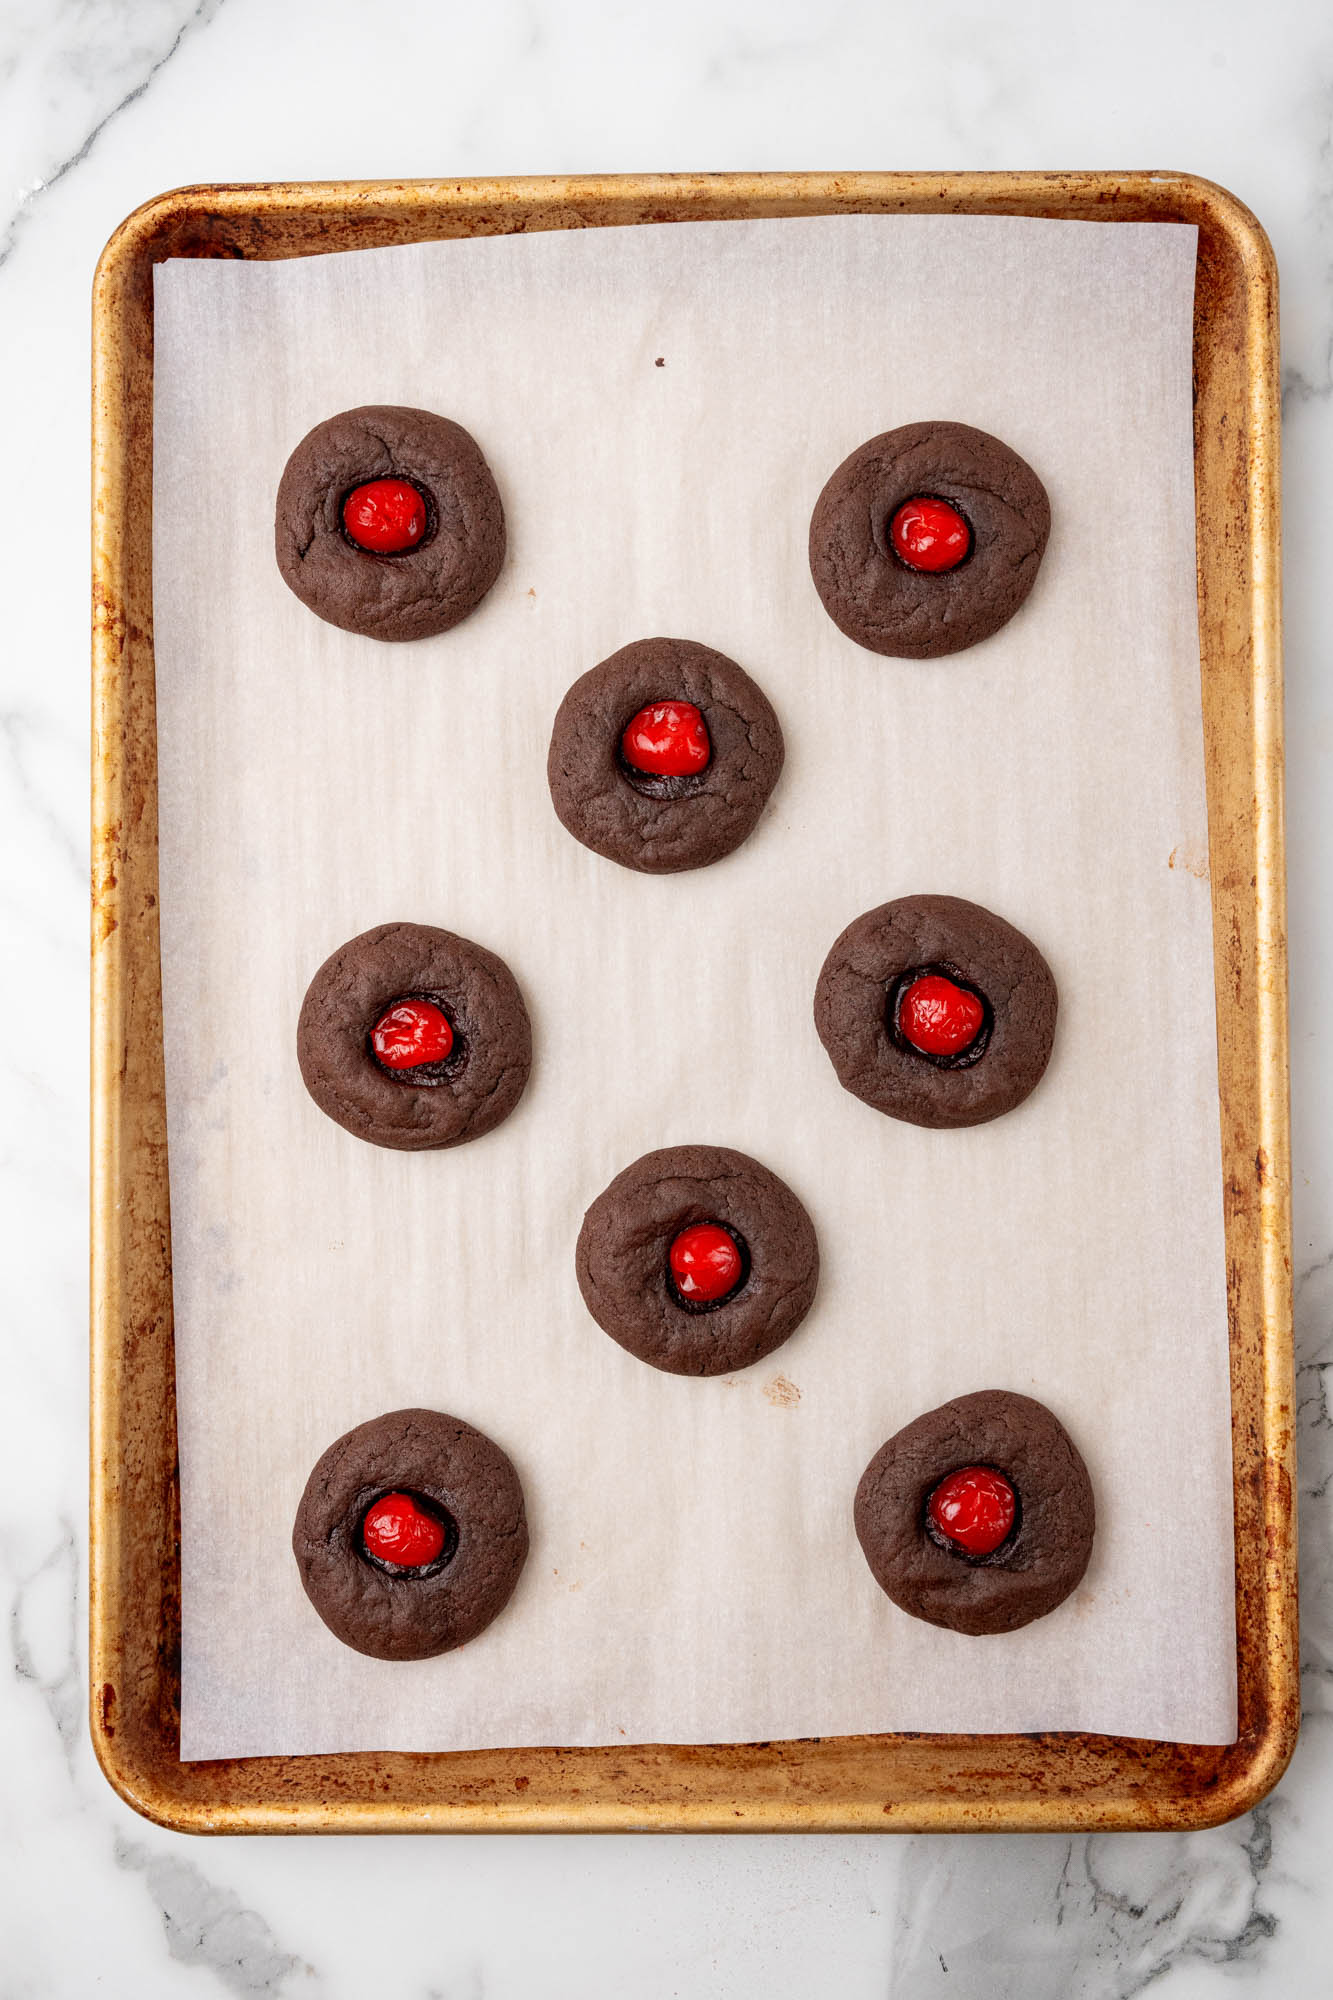 baked chocolate cookies with cherries in the center. top down view.